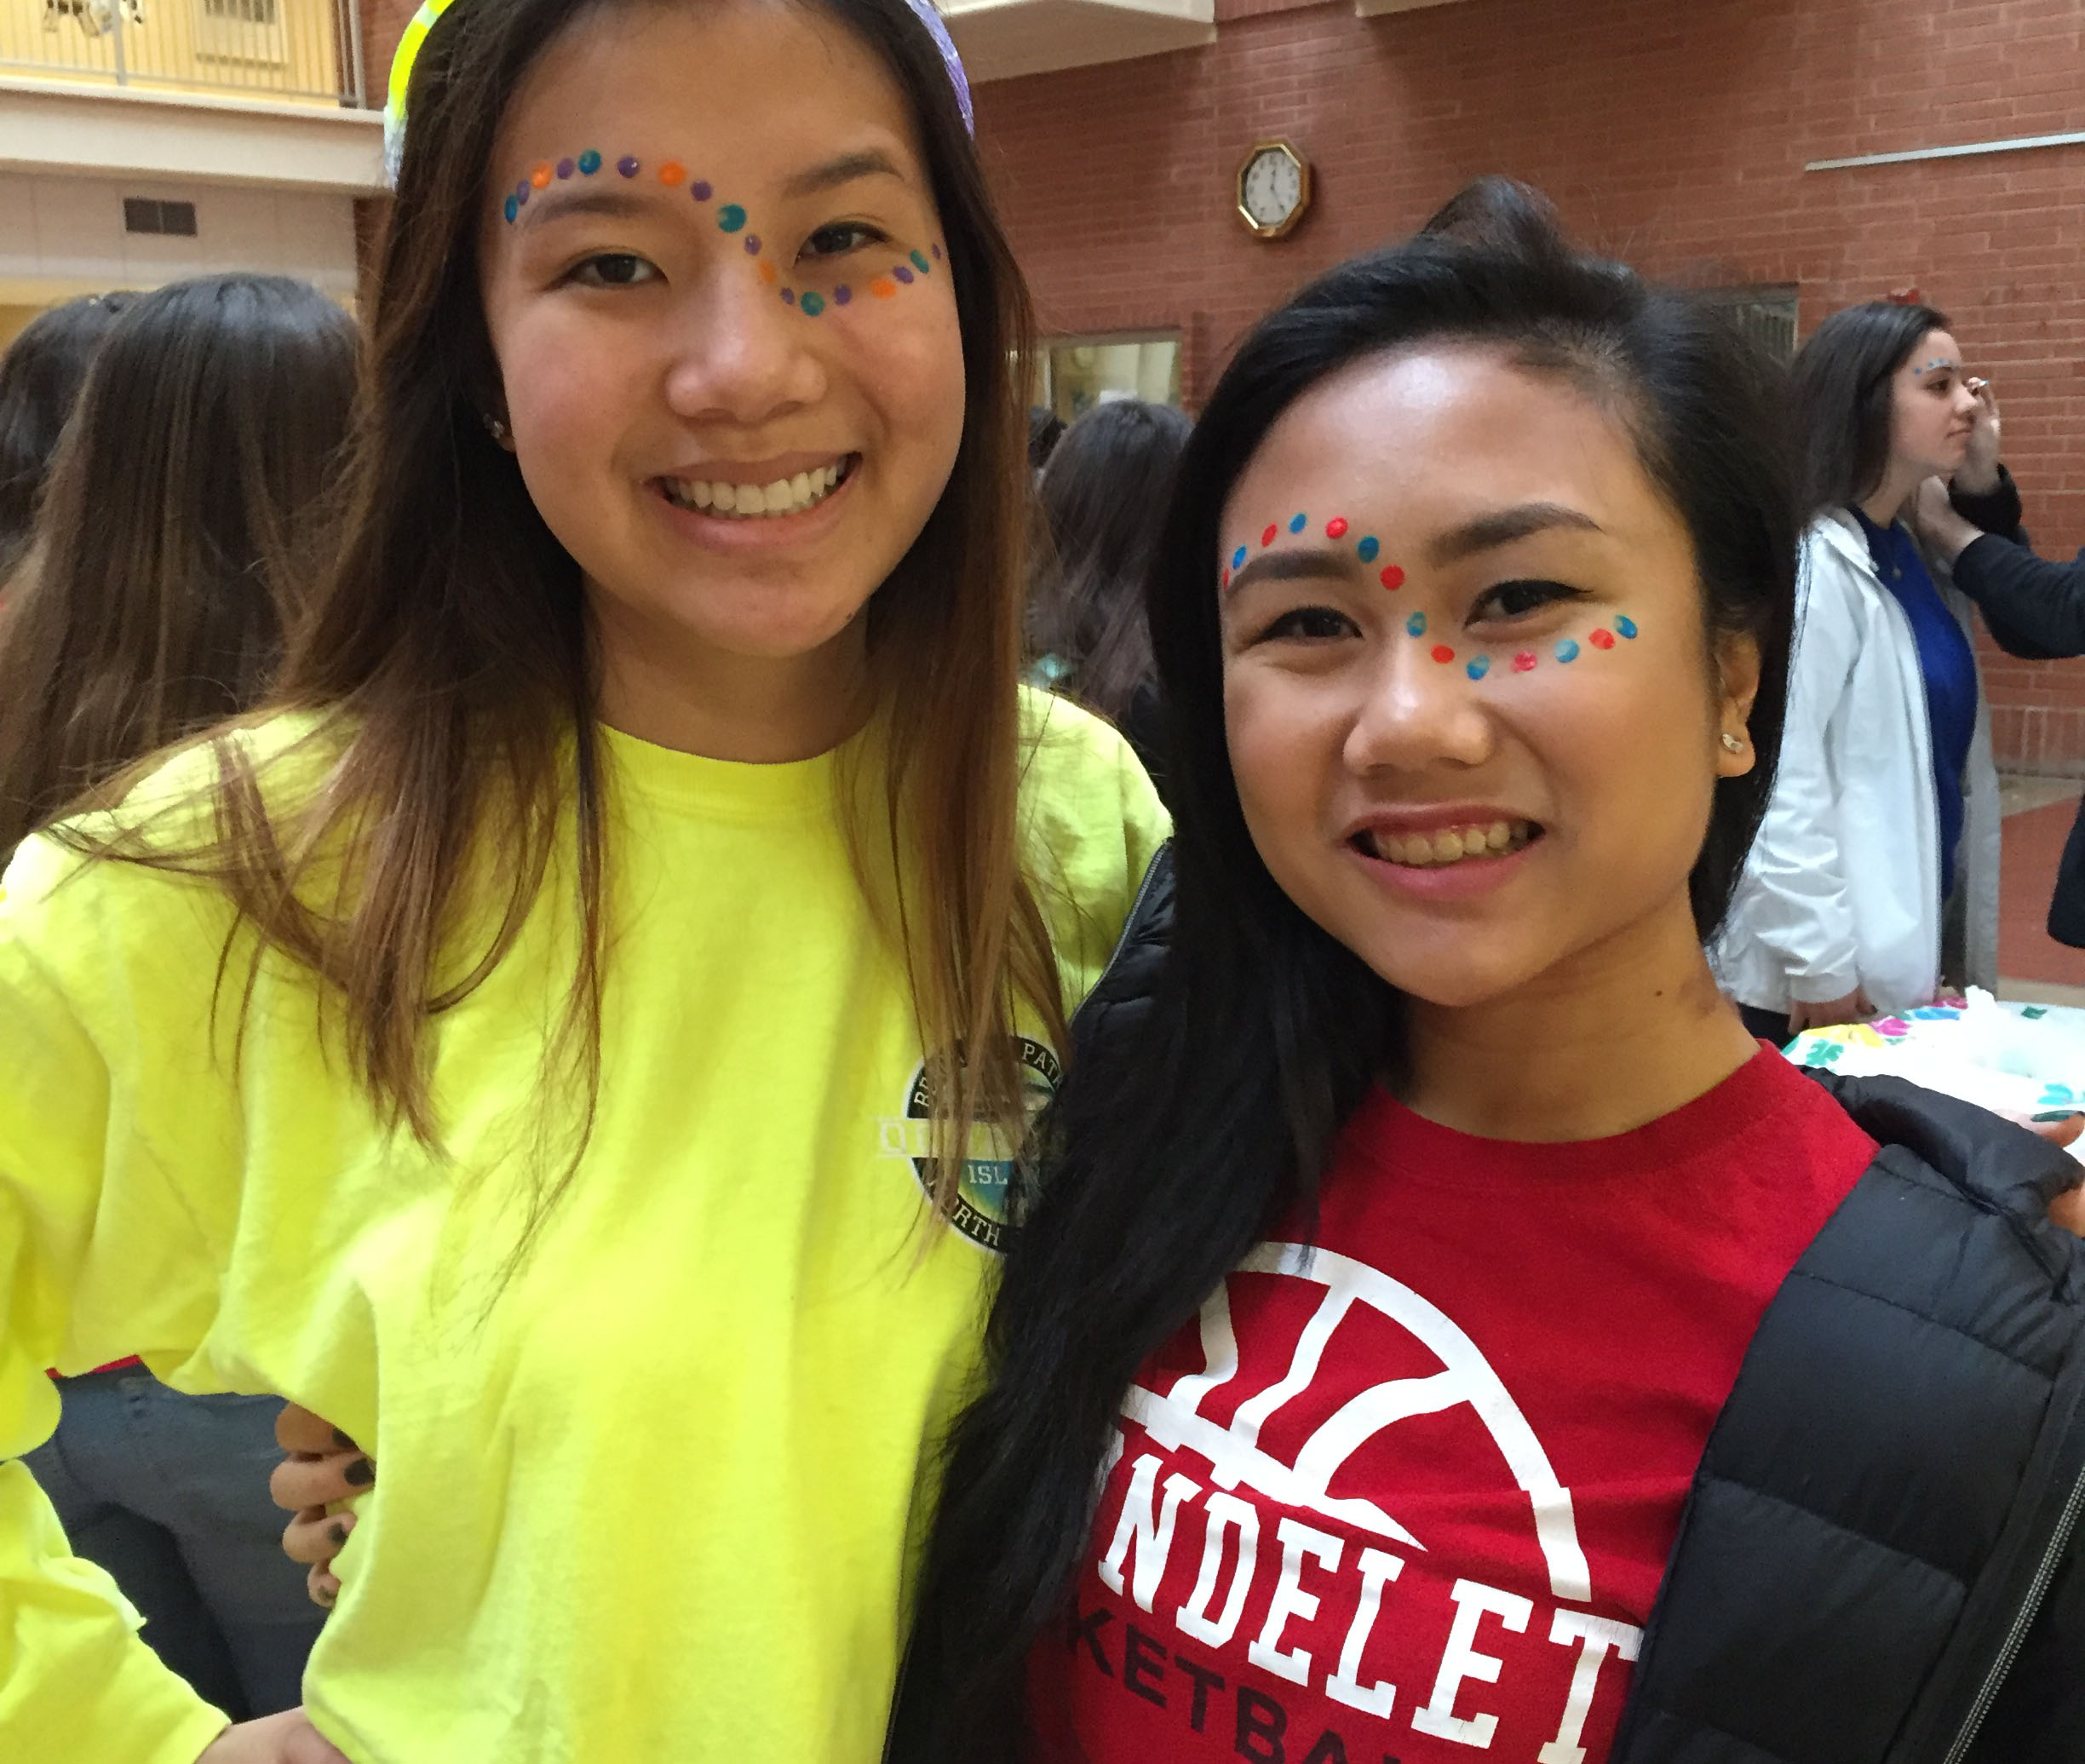 Two smiling Carondelet students with face paint